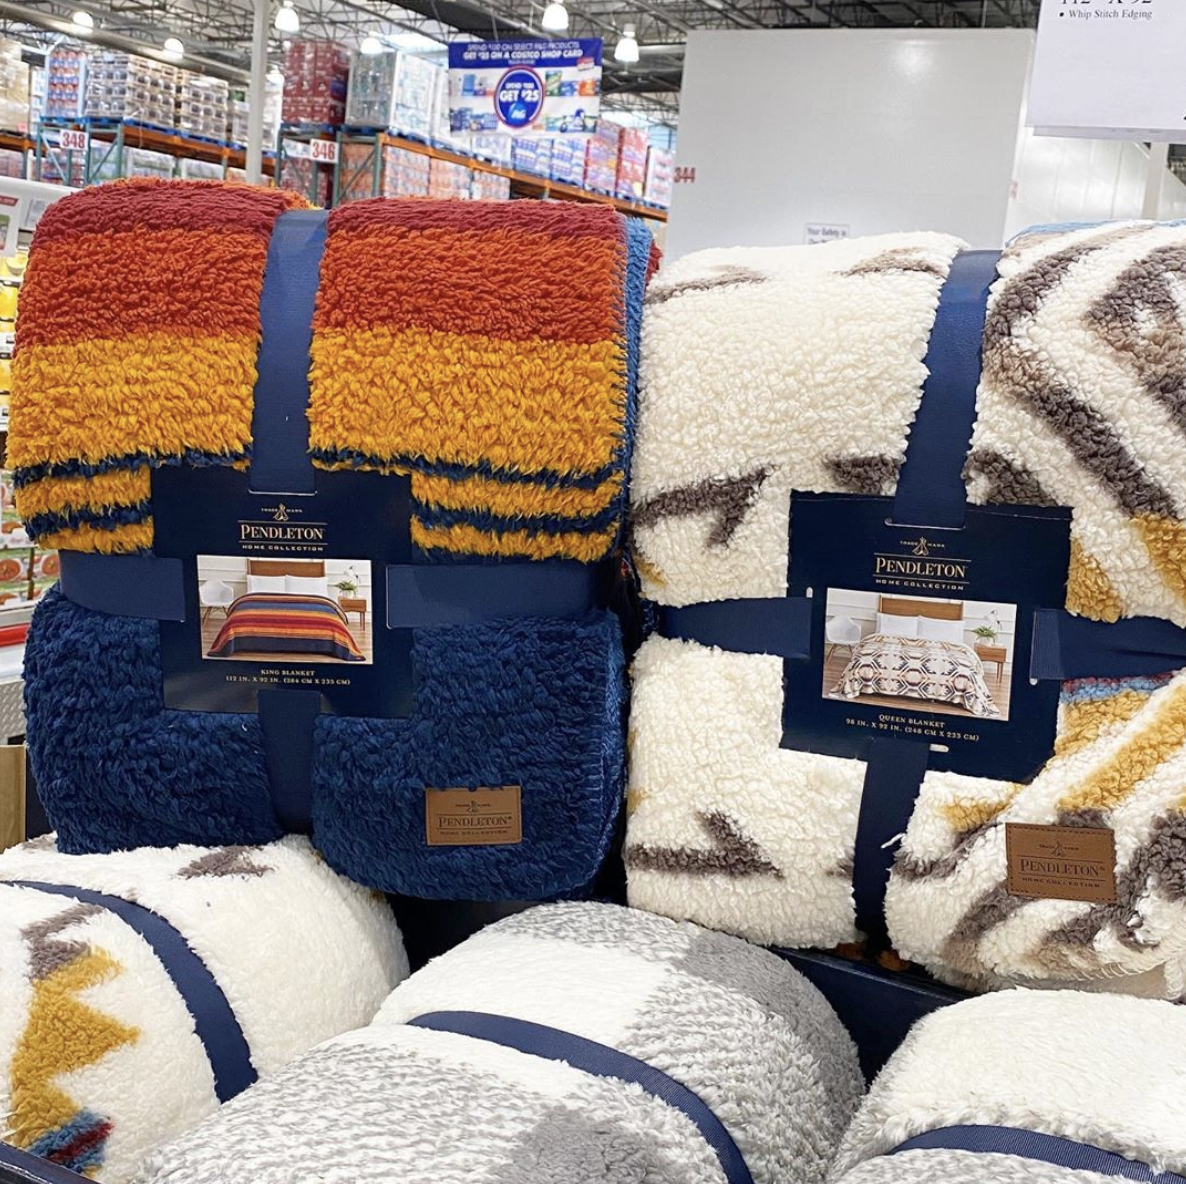 Costco Is Selling Fuzzy Pendleton Blankets for Under $30